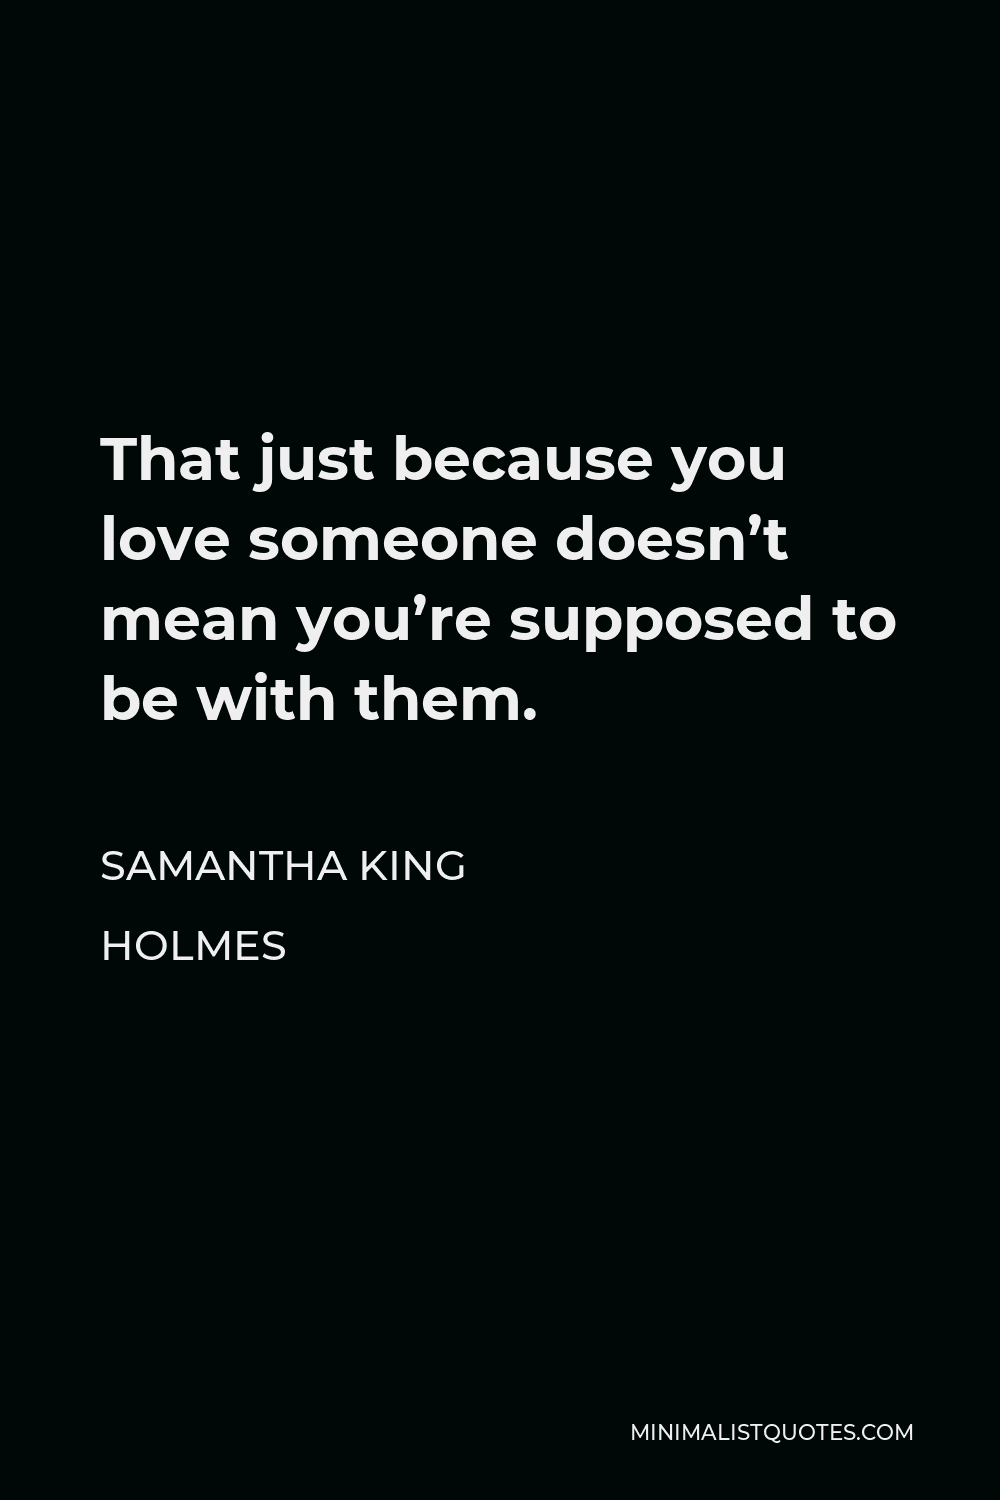 Samantha King Holmes Quote - That just because you love someone doesn’t mean you’re supposed to be with them.